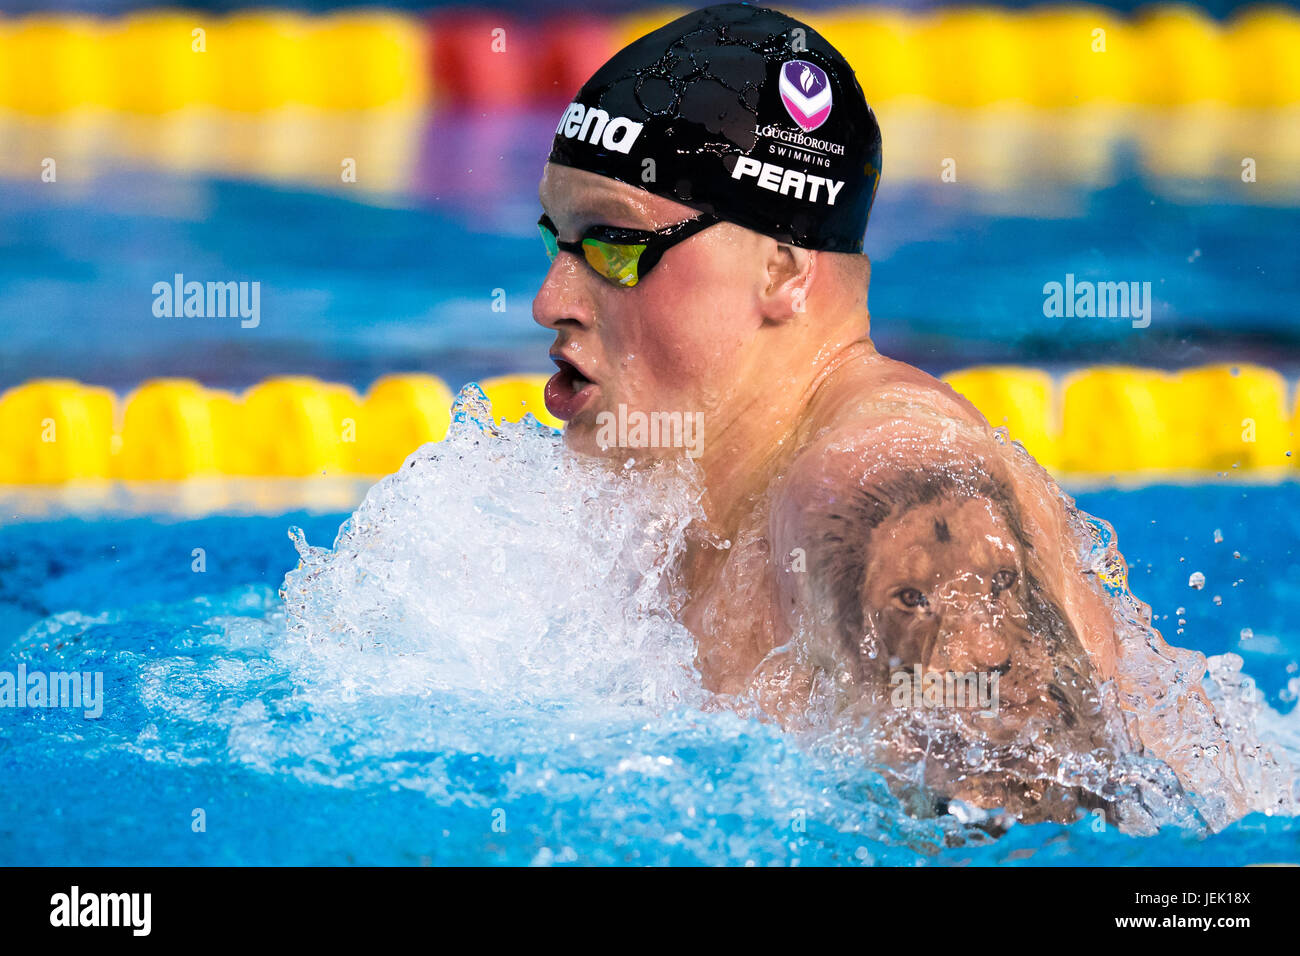 Adam Peaty competes in the 50m Breaststroke at the British Swimming Championships at Ponds Forge, Sheffield on April, 18, 2017. Stock Photo